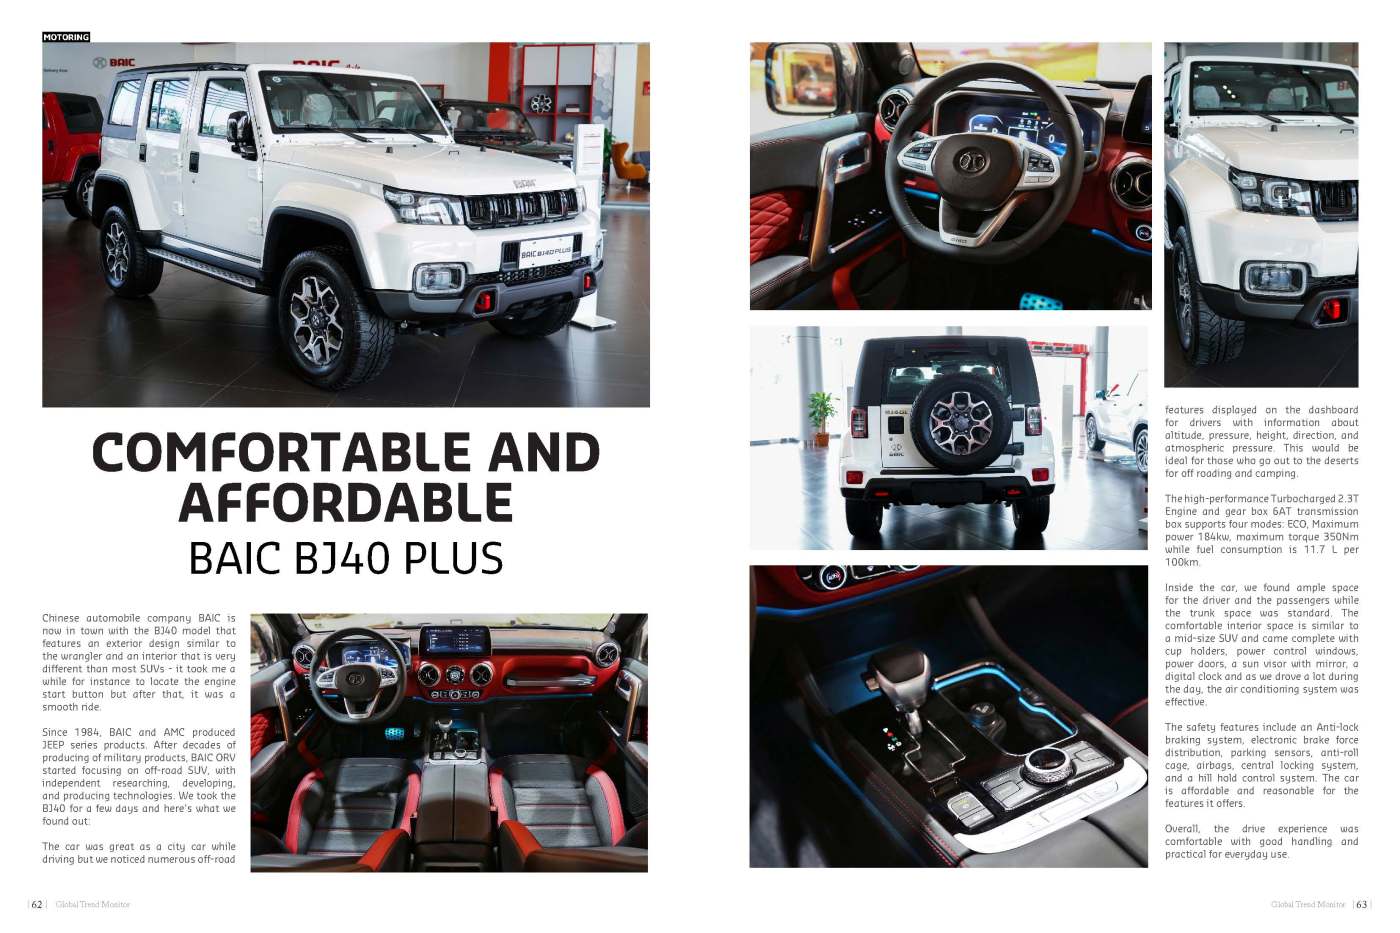 Comfortable and Affordable: BAIC BJ40 PLUS – Global Trend Monitor